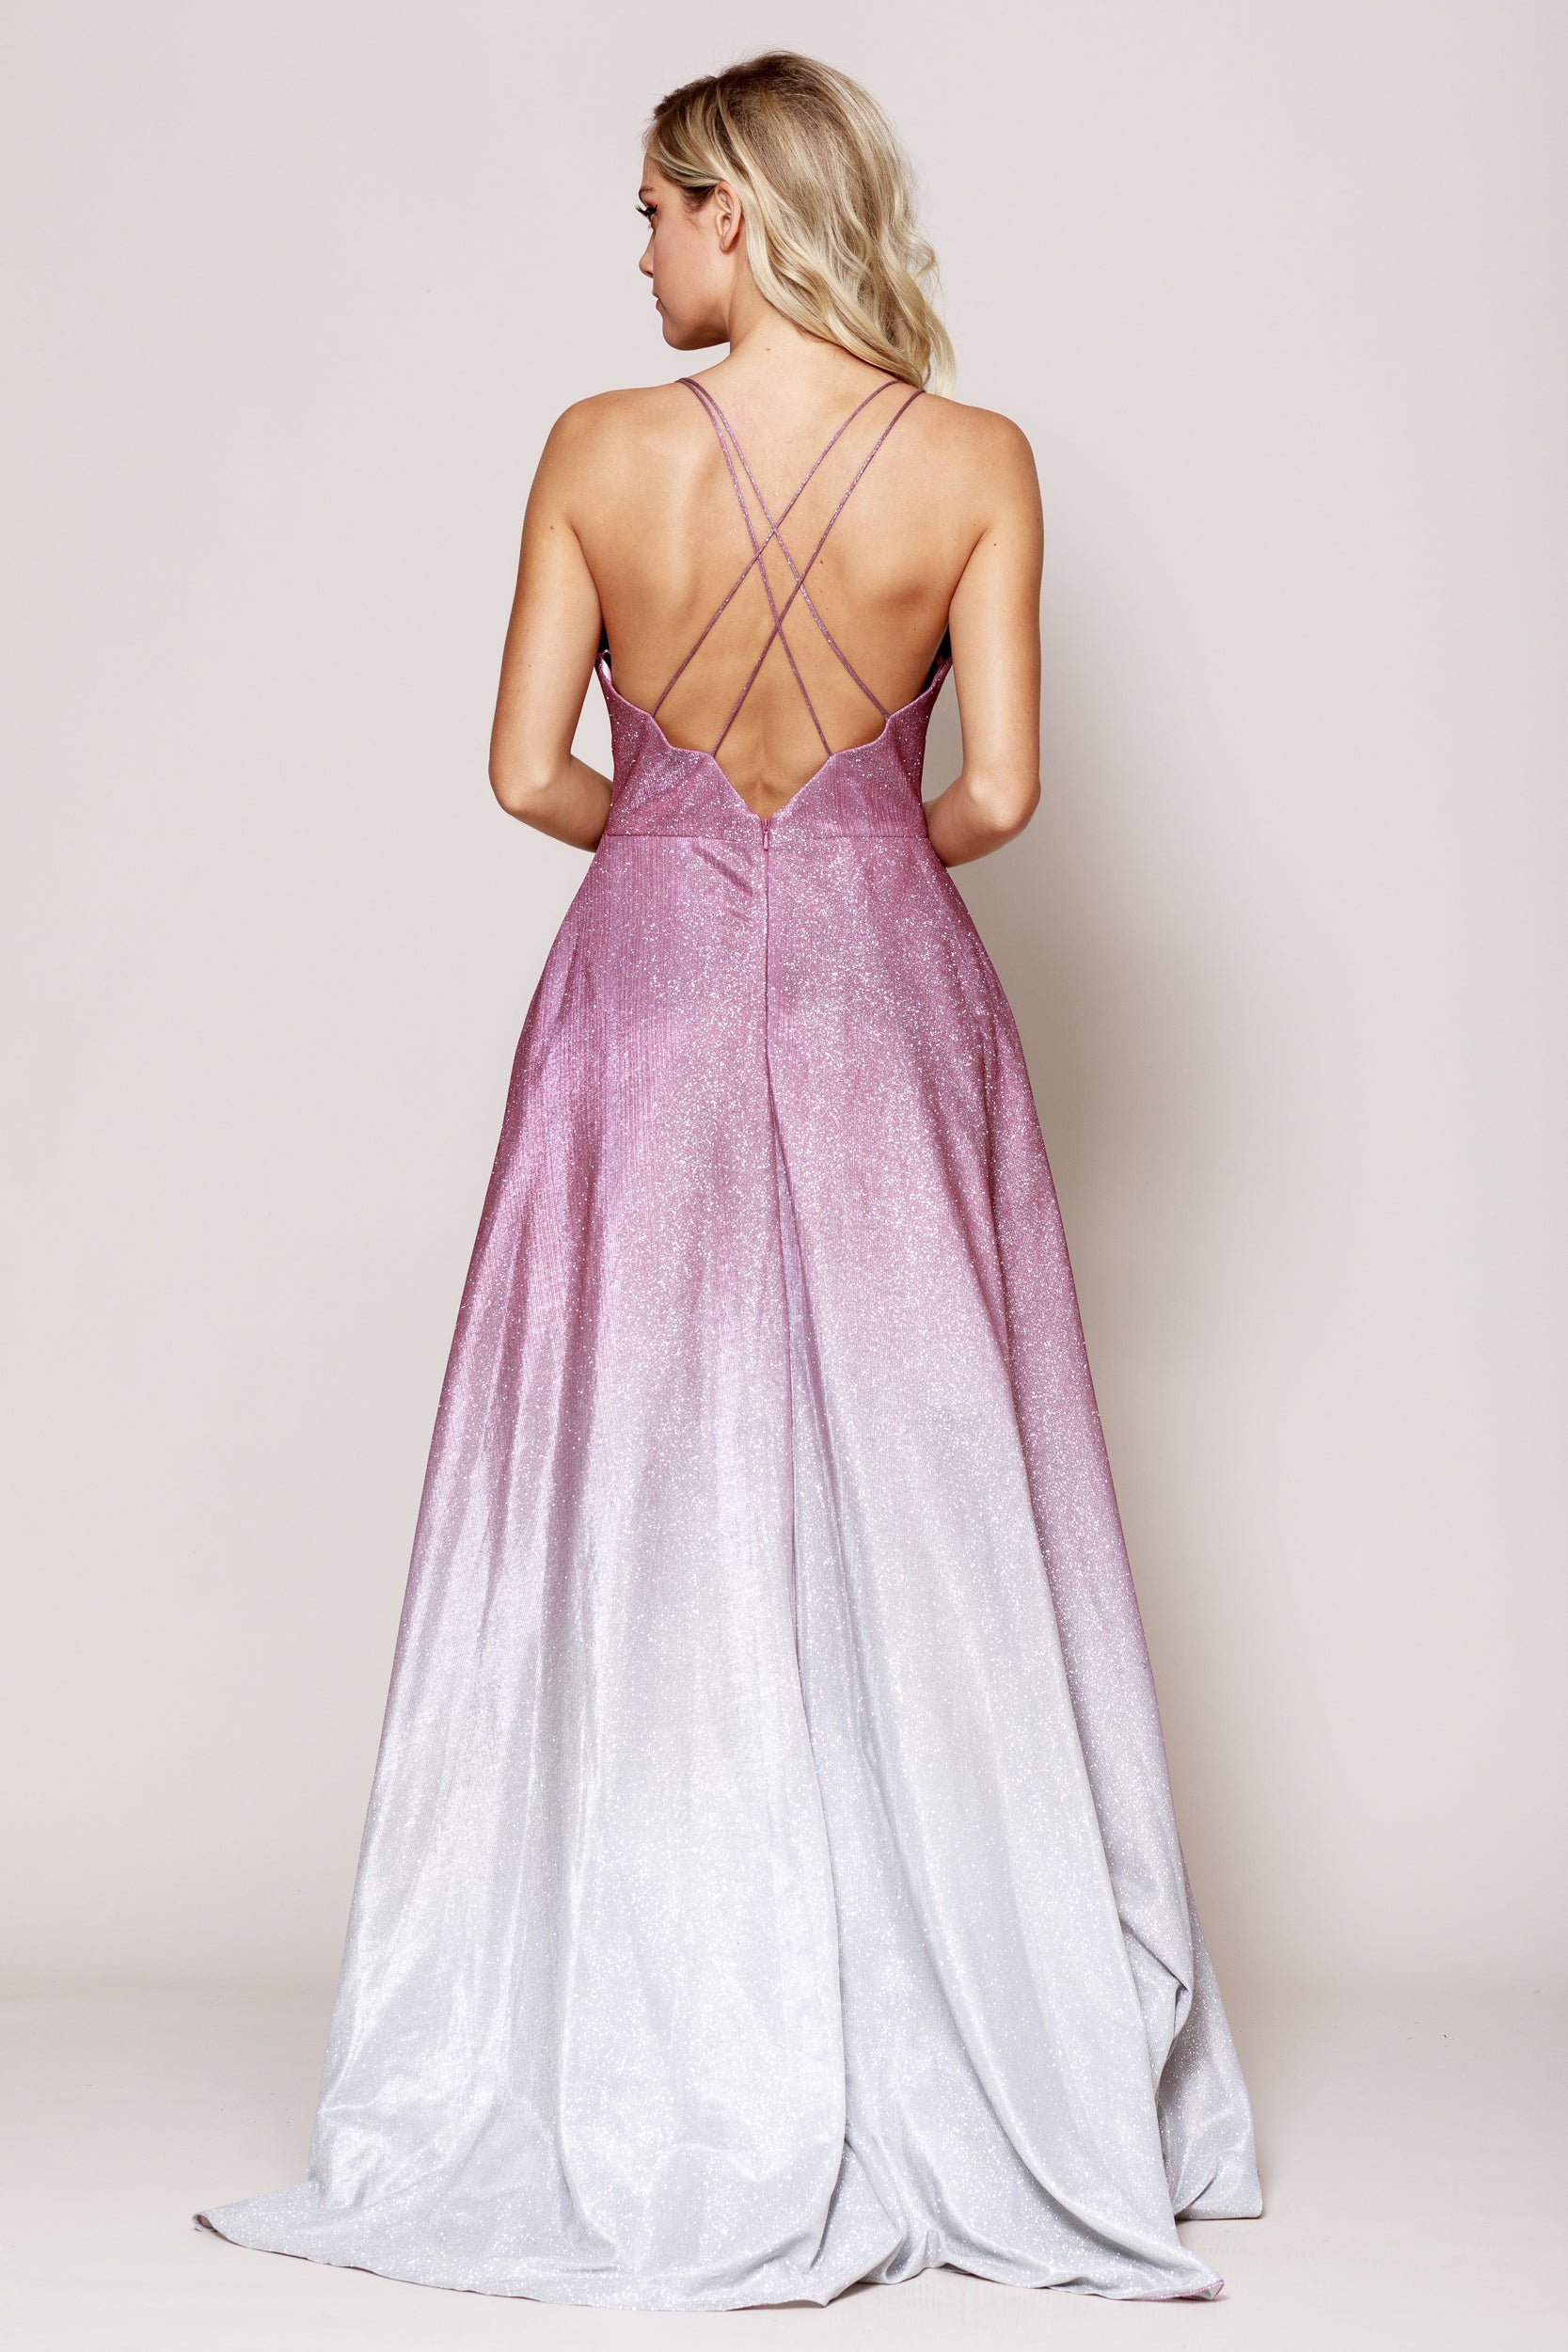 Image of Double Spaghetti A Line Prom Gown back in Rose